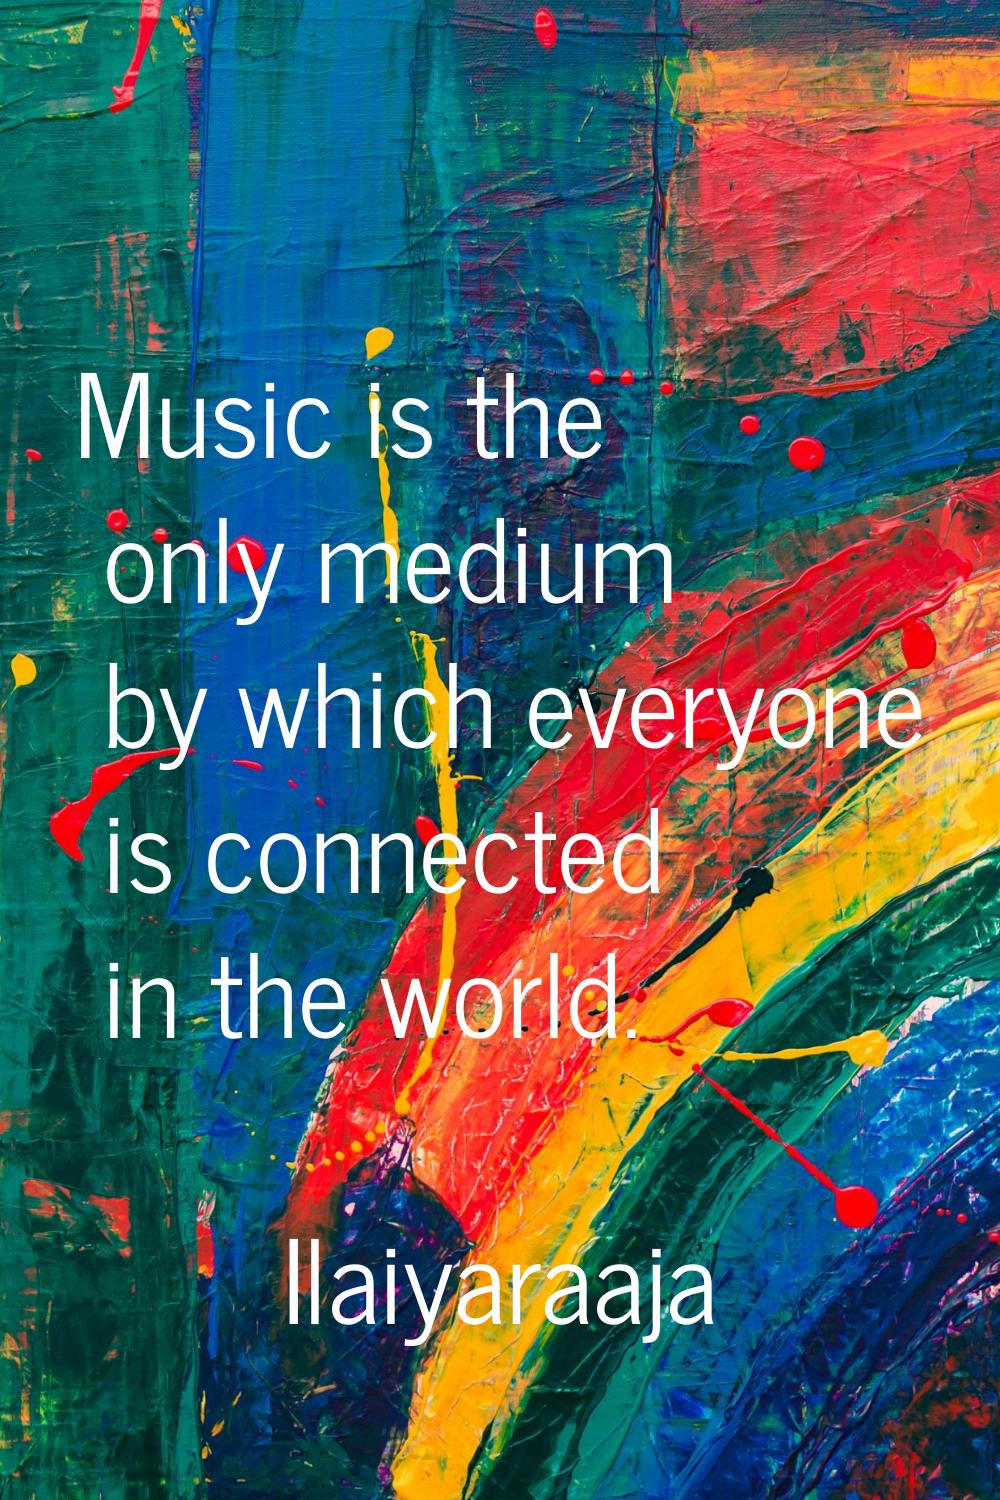 Music is the only medium by which everyone is connected in the world.